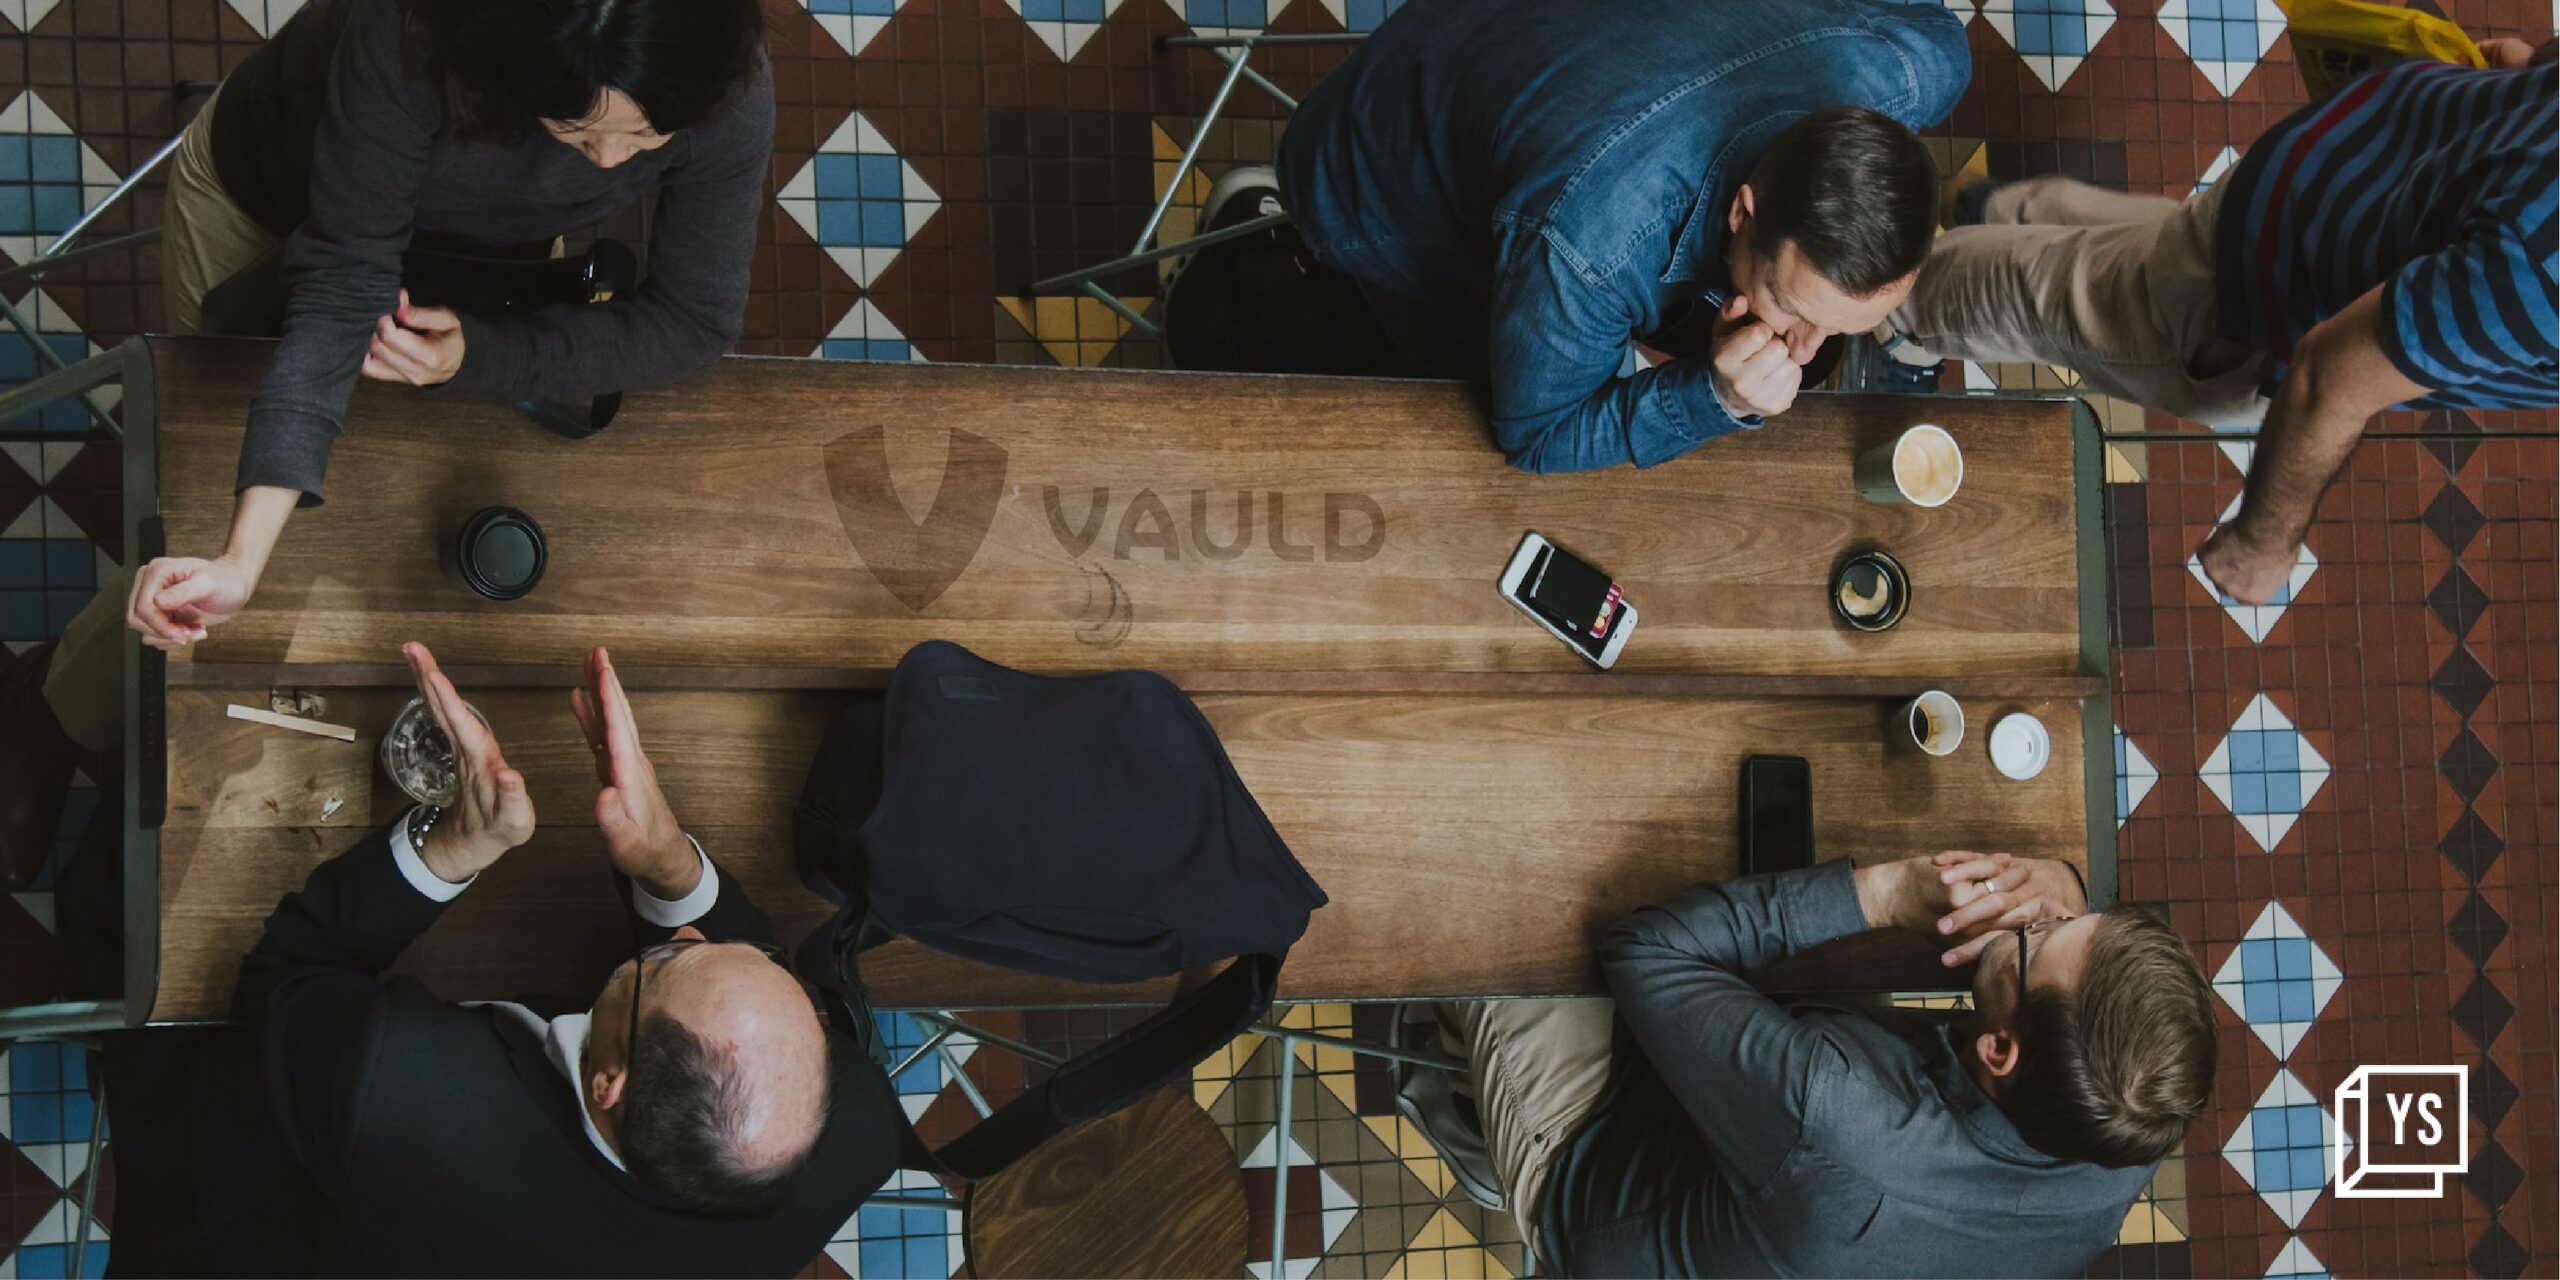 You are currently viewing [Exclusive] Vauld to seek 3-month moratorium extension as creditors panel explores bailout options